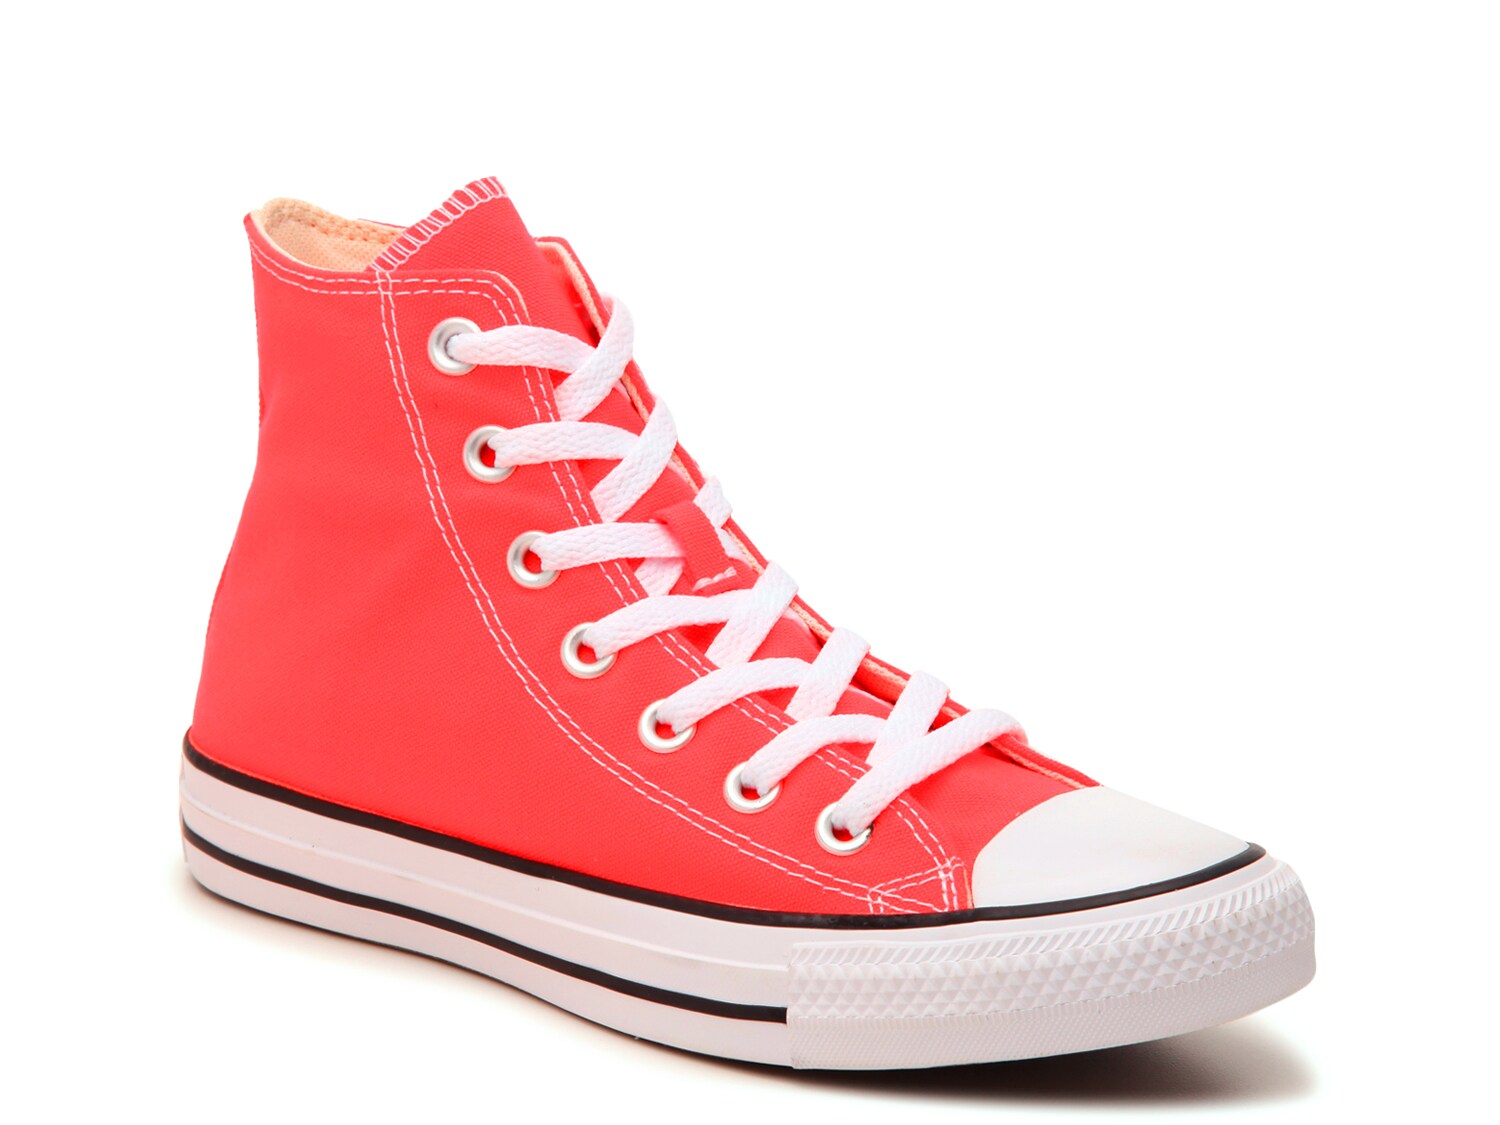 red converse womens size 7